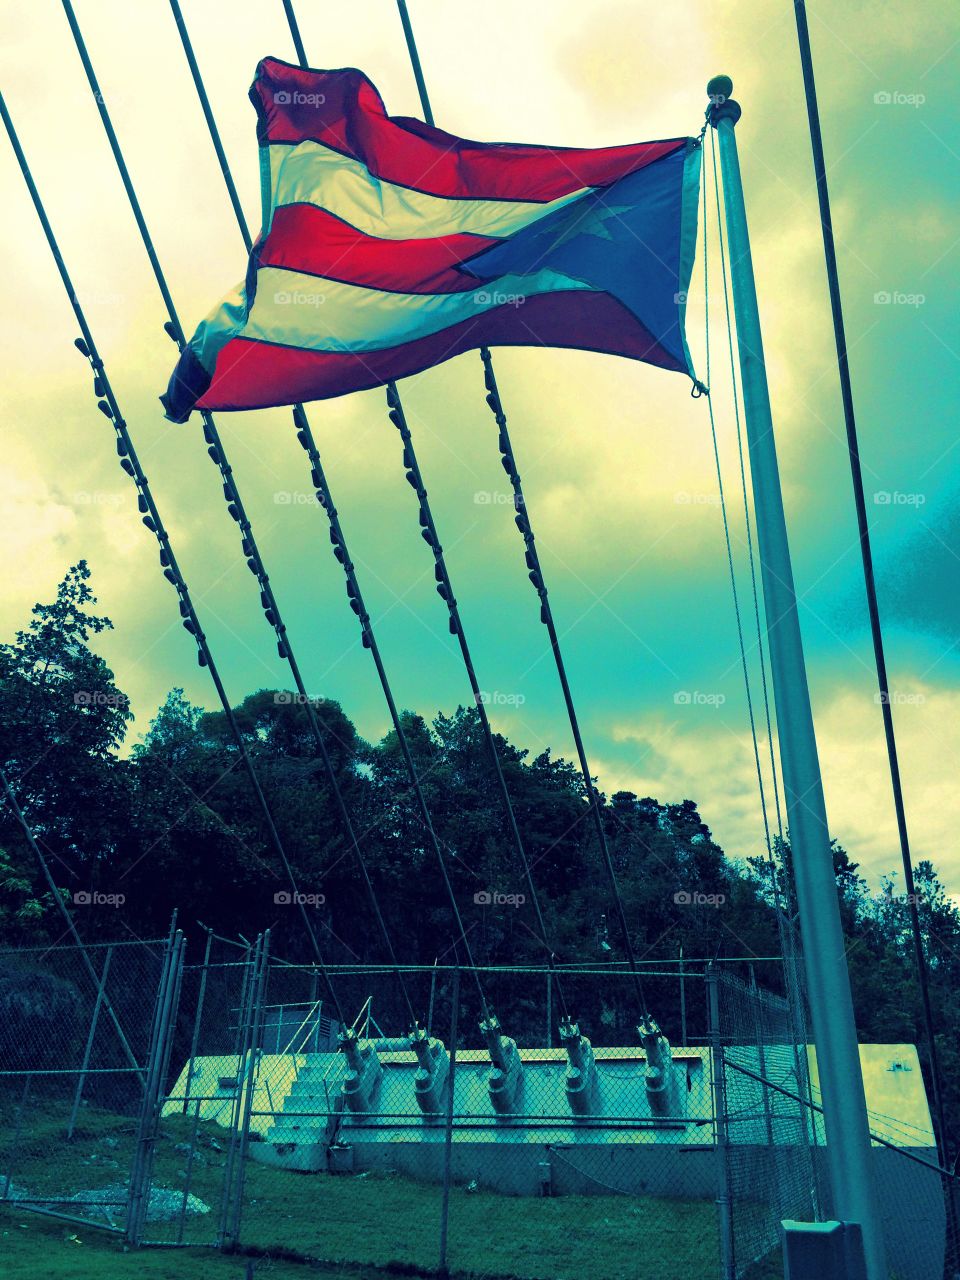 Pride in Engineering. The Puerto Rican flag flies proudly in front of an anchor for the Arecibo Radio Telescope.